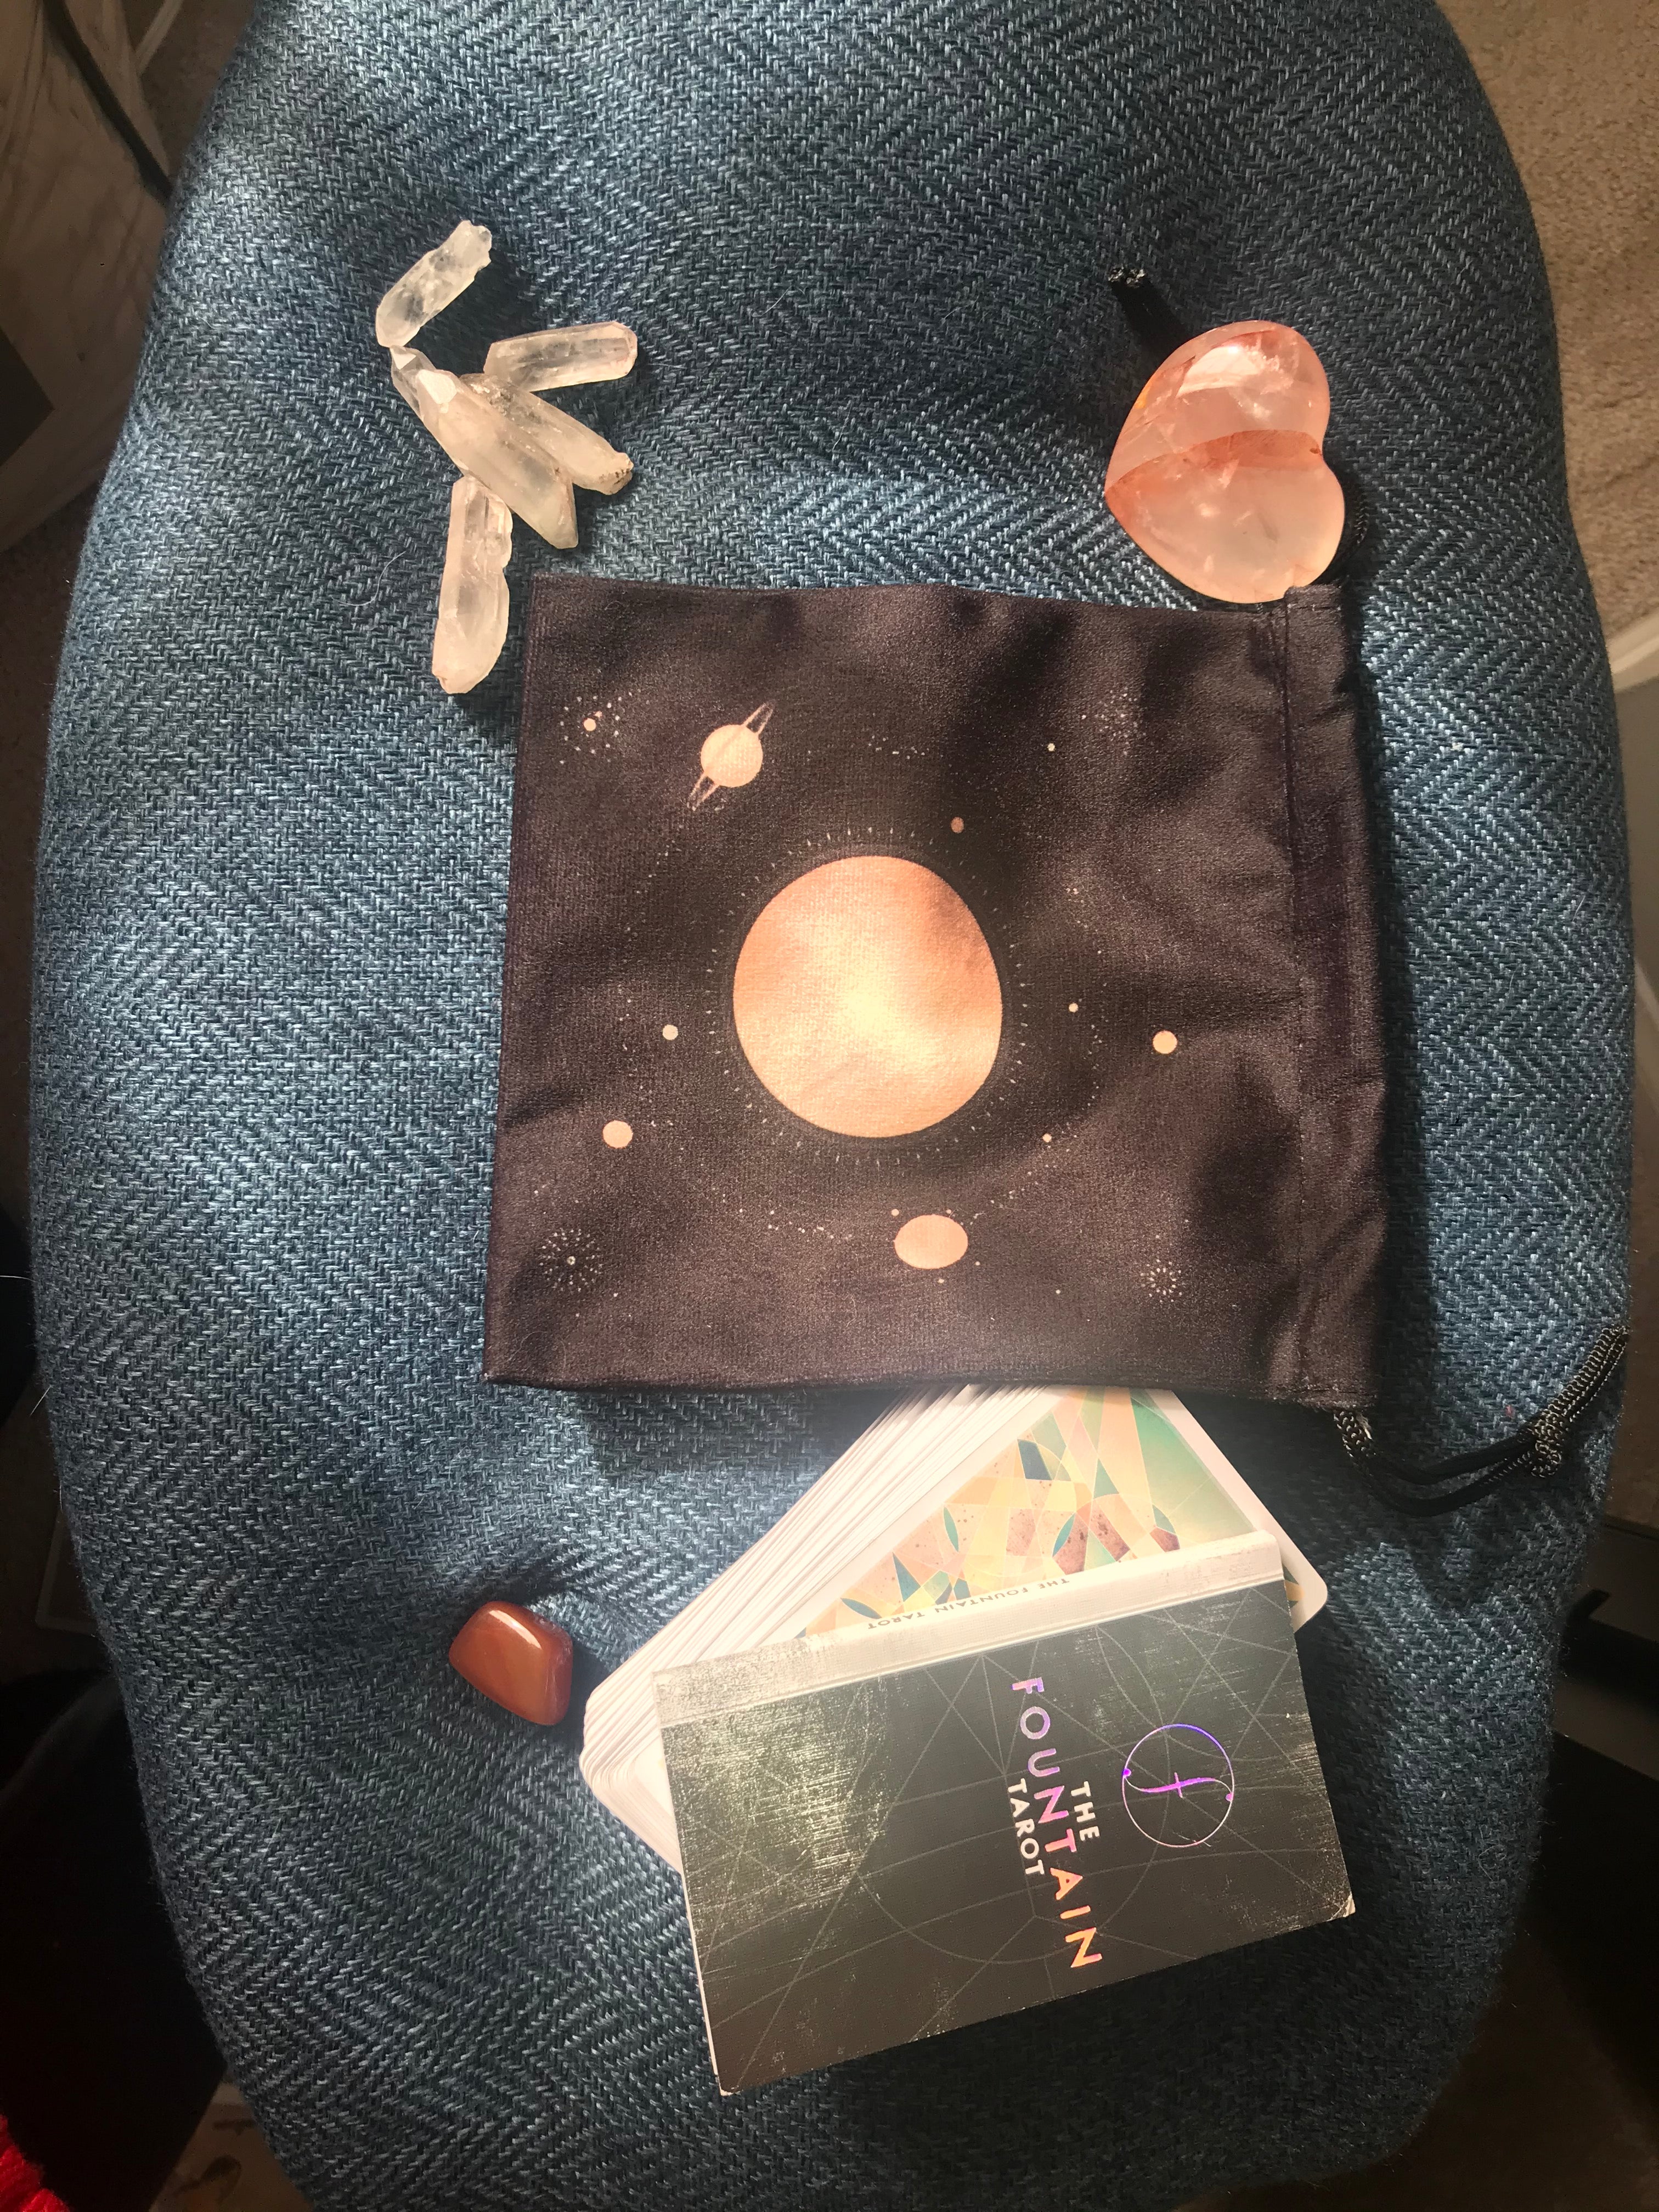 Velvet bag, SMALL: Planets and Solar System, Small 6 inches x 6.5 inches tall, Black Velvet